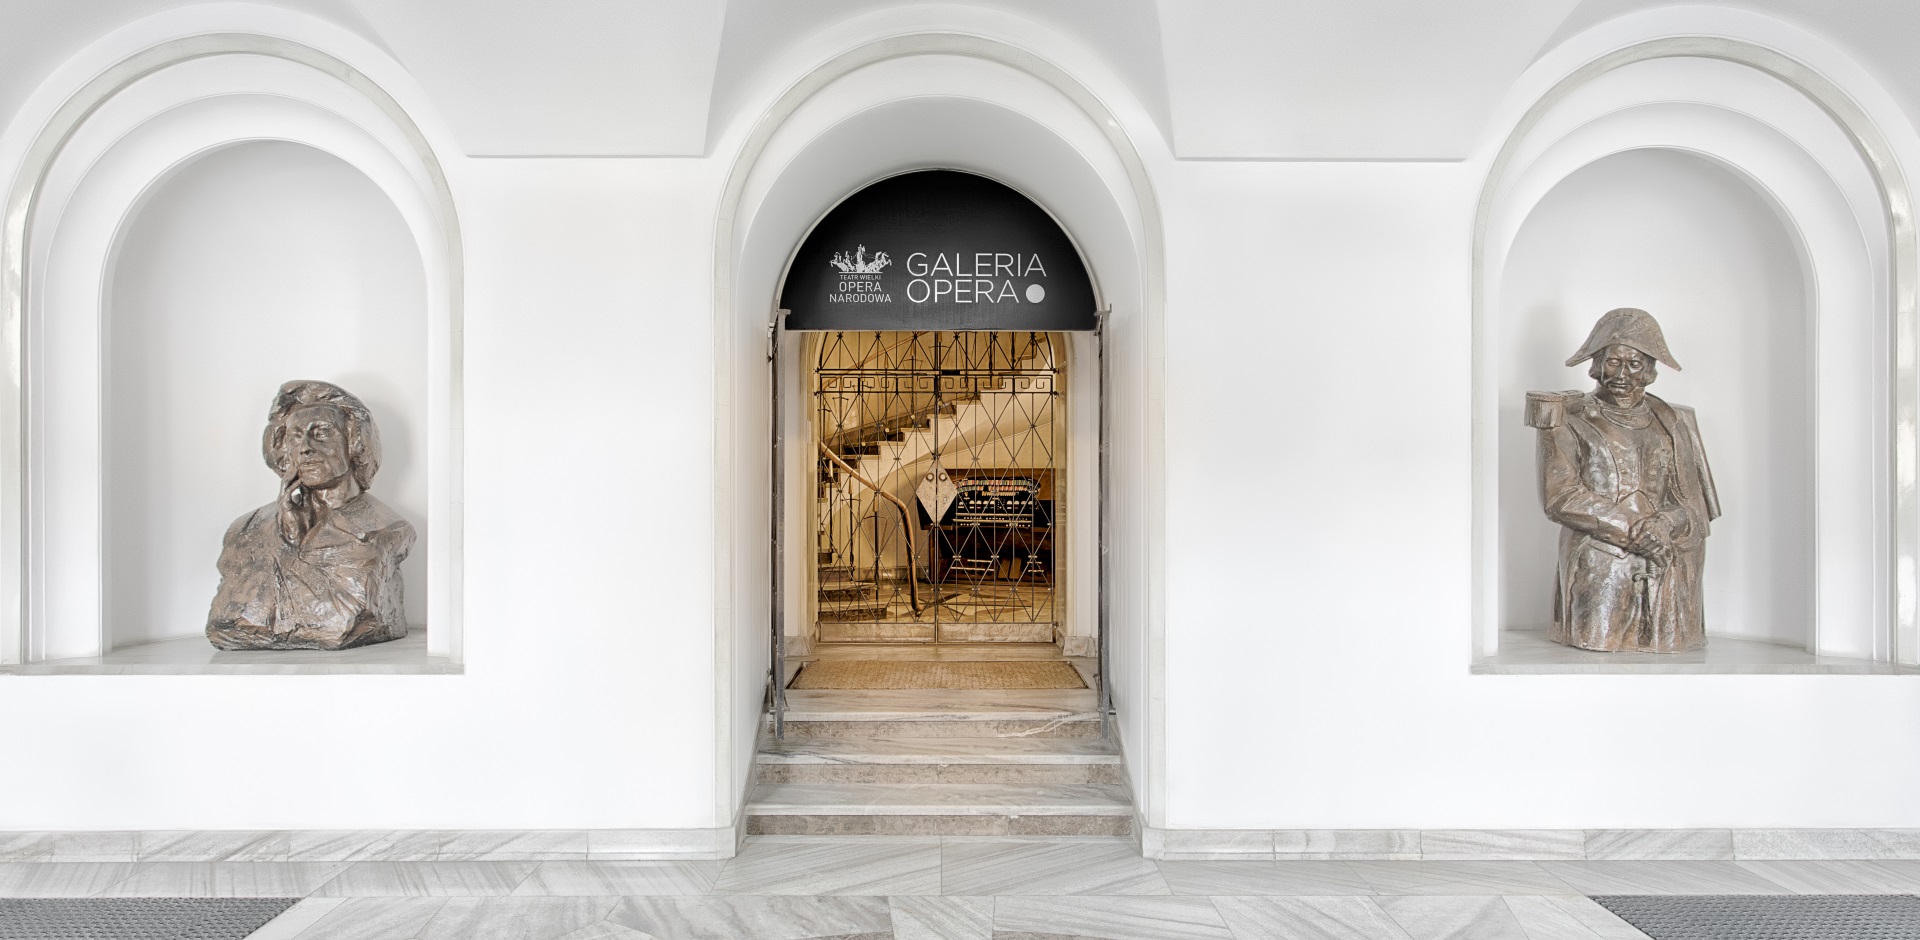 Entrance to Opera Gallery